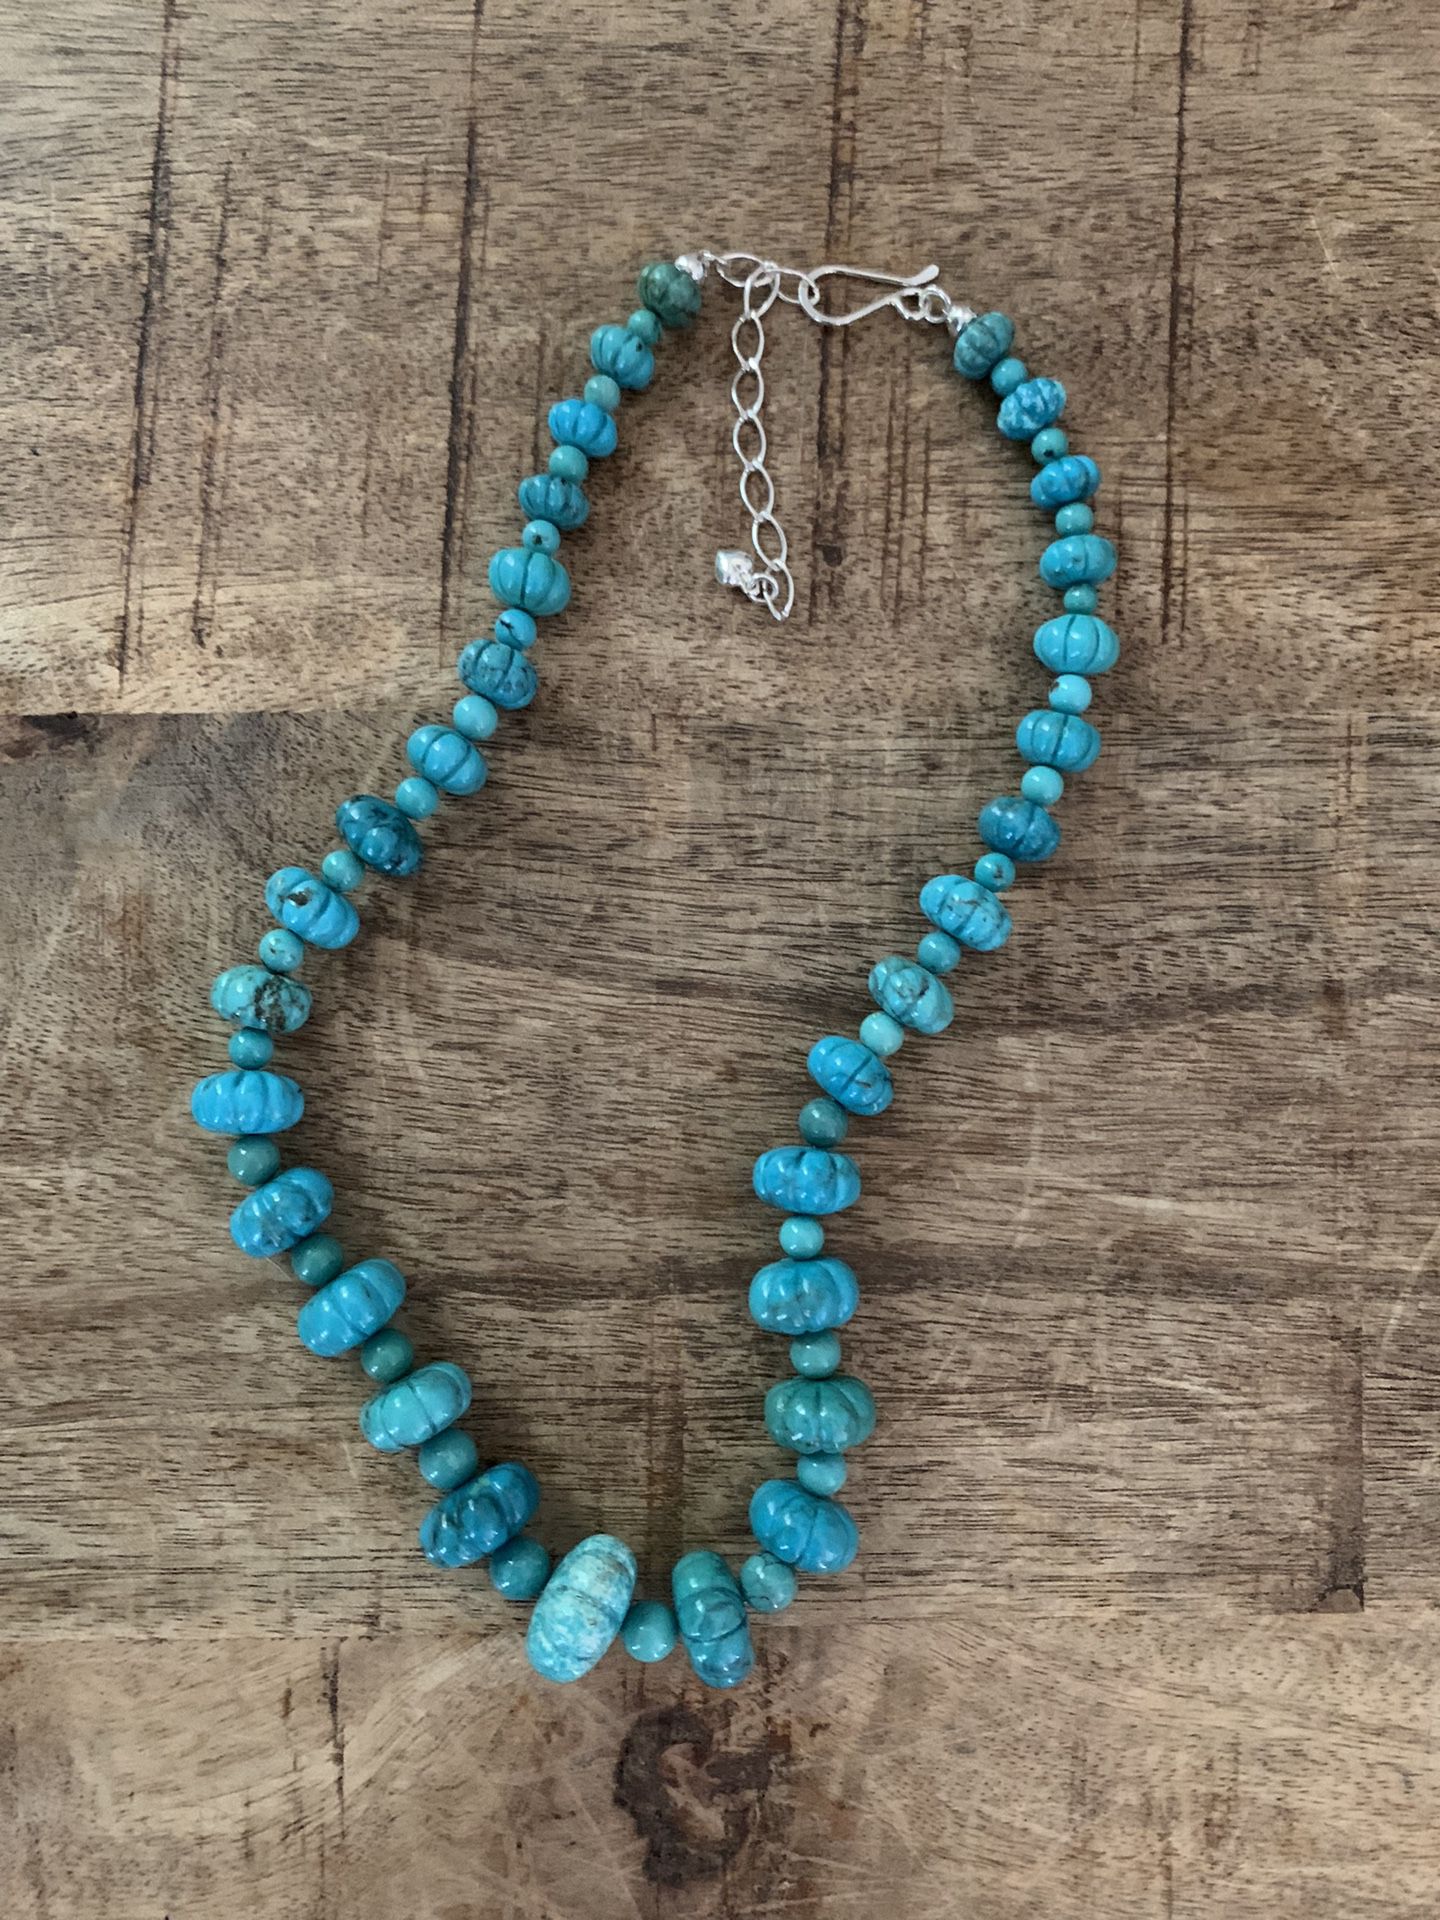 Turquoise & Sterling Silver Necklace 